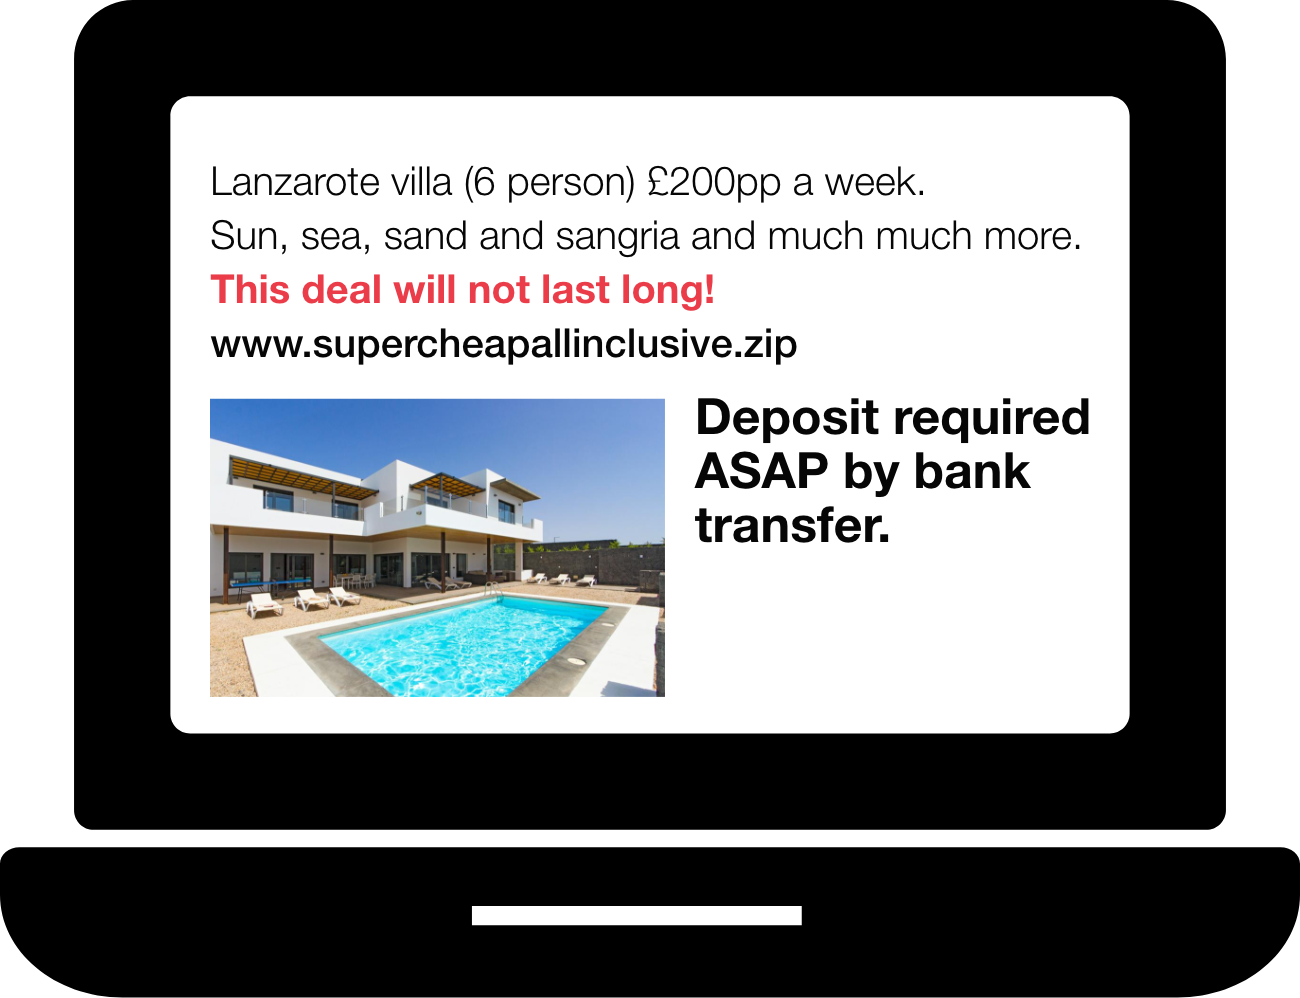 Lanzarote villa (6 person) £200pp a week.<br />
Sun, sea, sand and sangria and much much more. This deal will not last long!<br />
Deposit required ASAP by bank transfer.<br />
www.supercheapallinclusive.zip